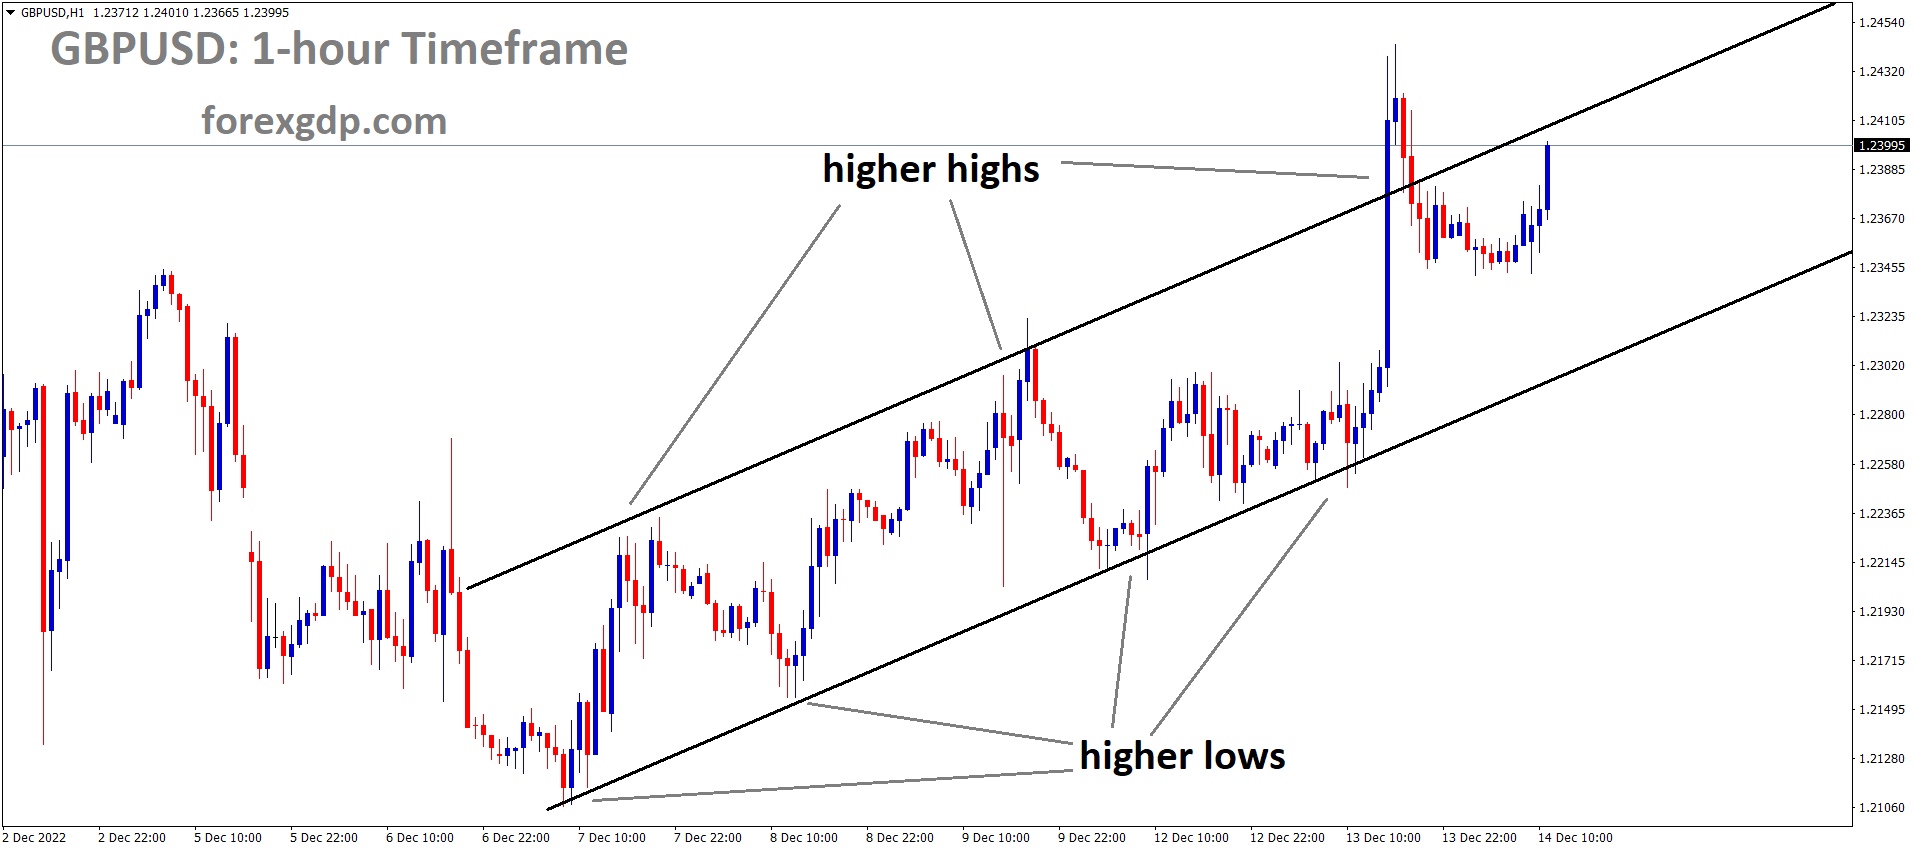 GBPUSD is moving in an Ascending channel and the market has reached the higher high area of the channel 2